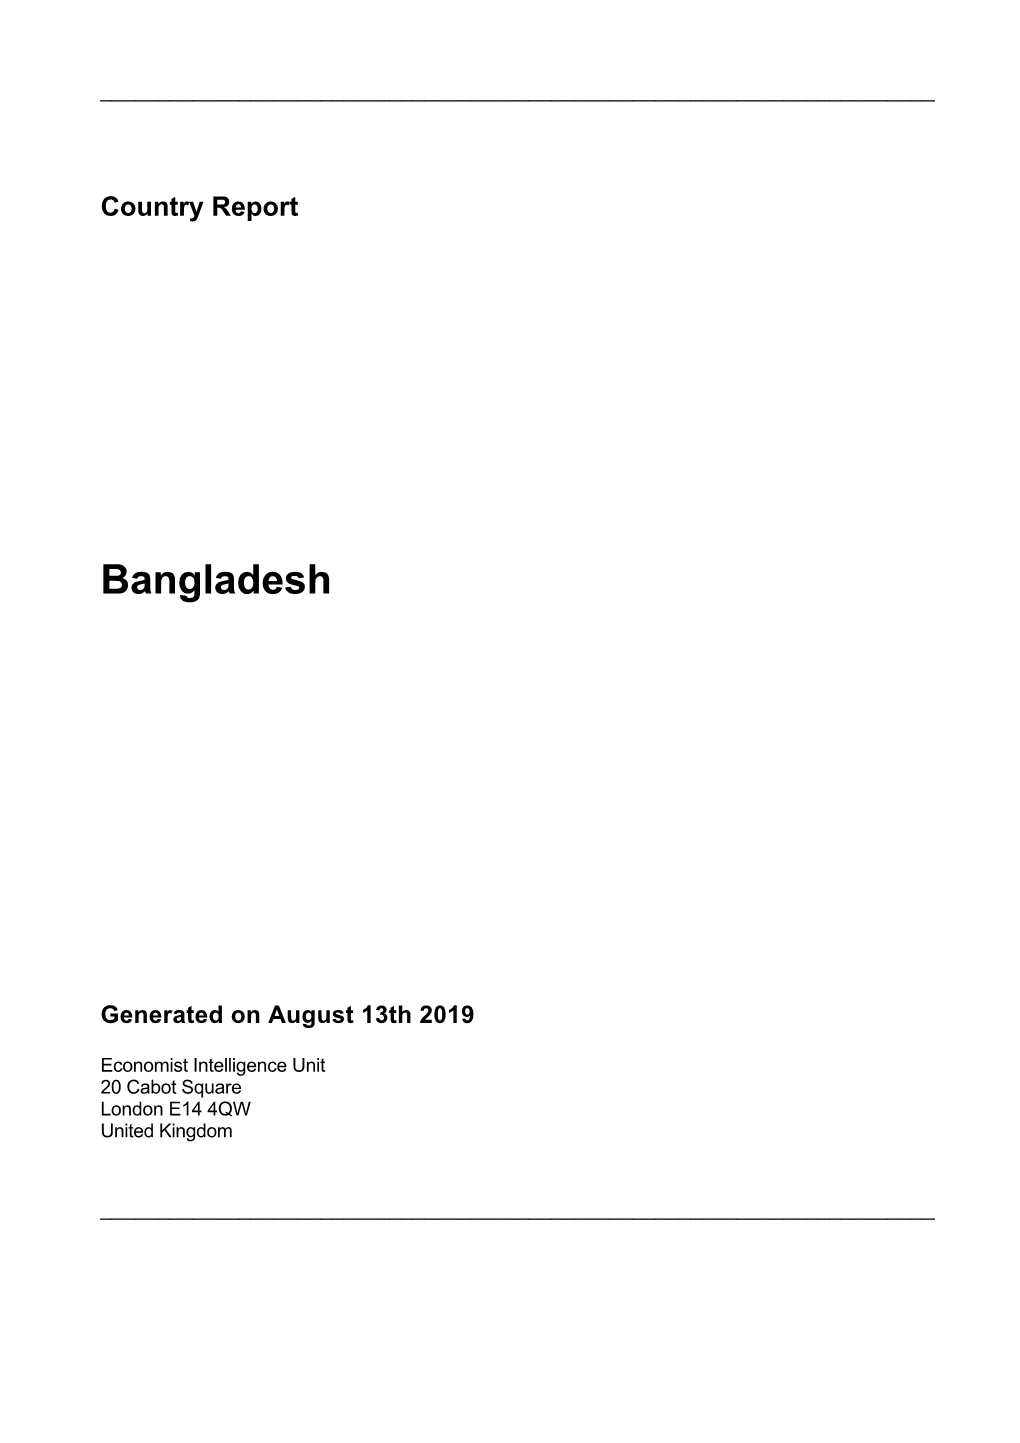 Country Report Bangladesh August 2019